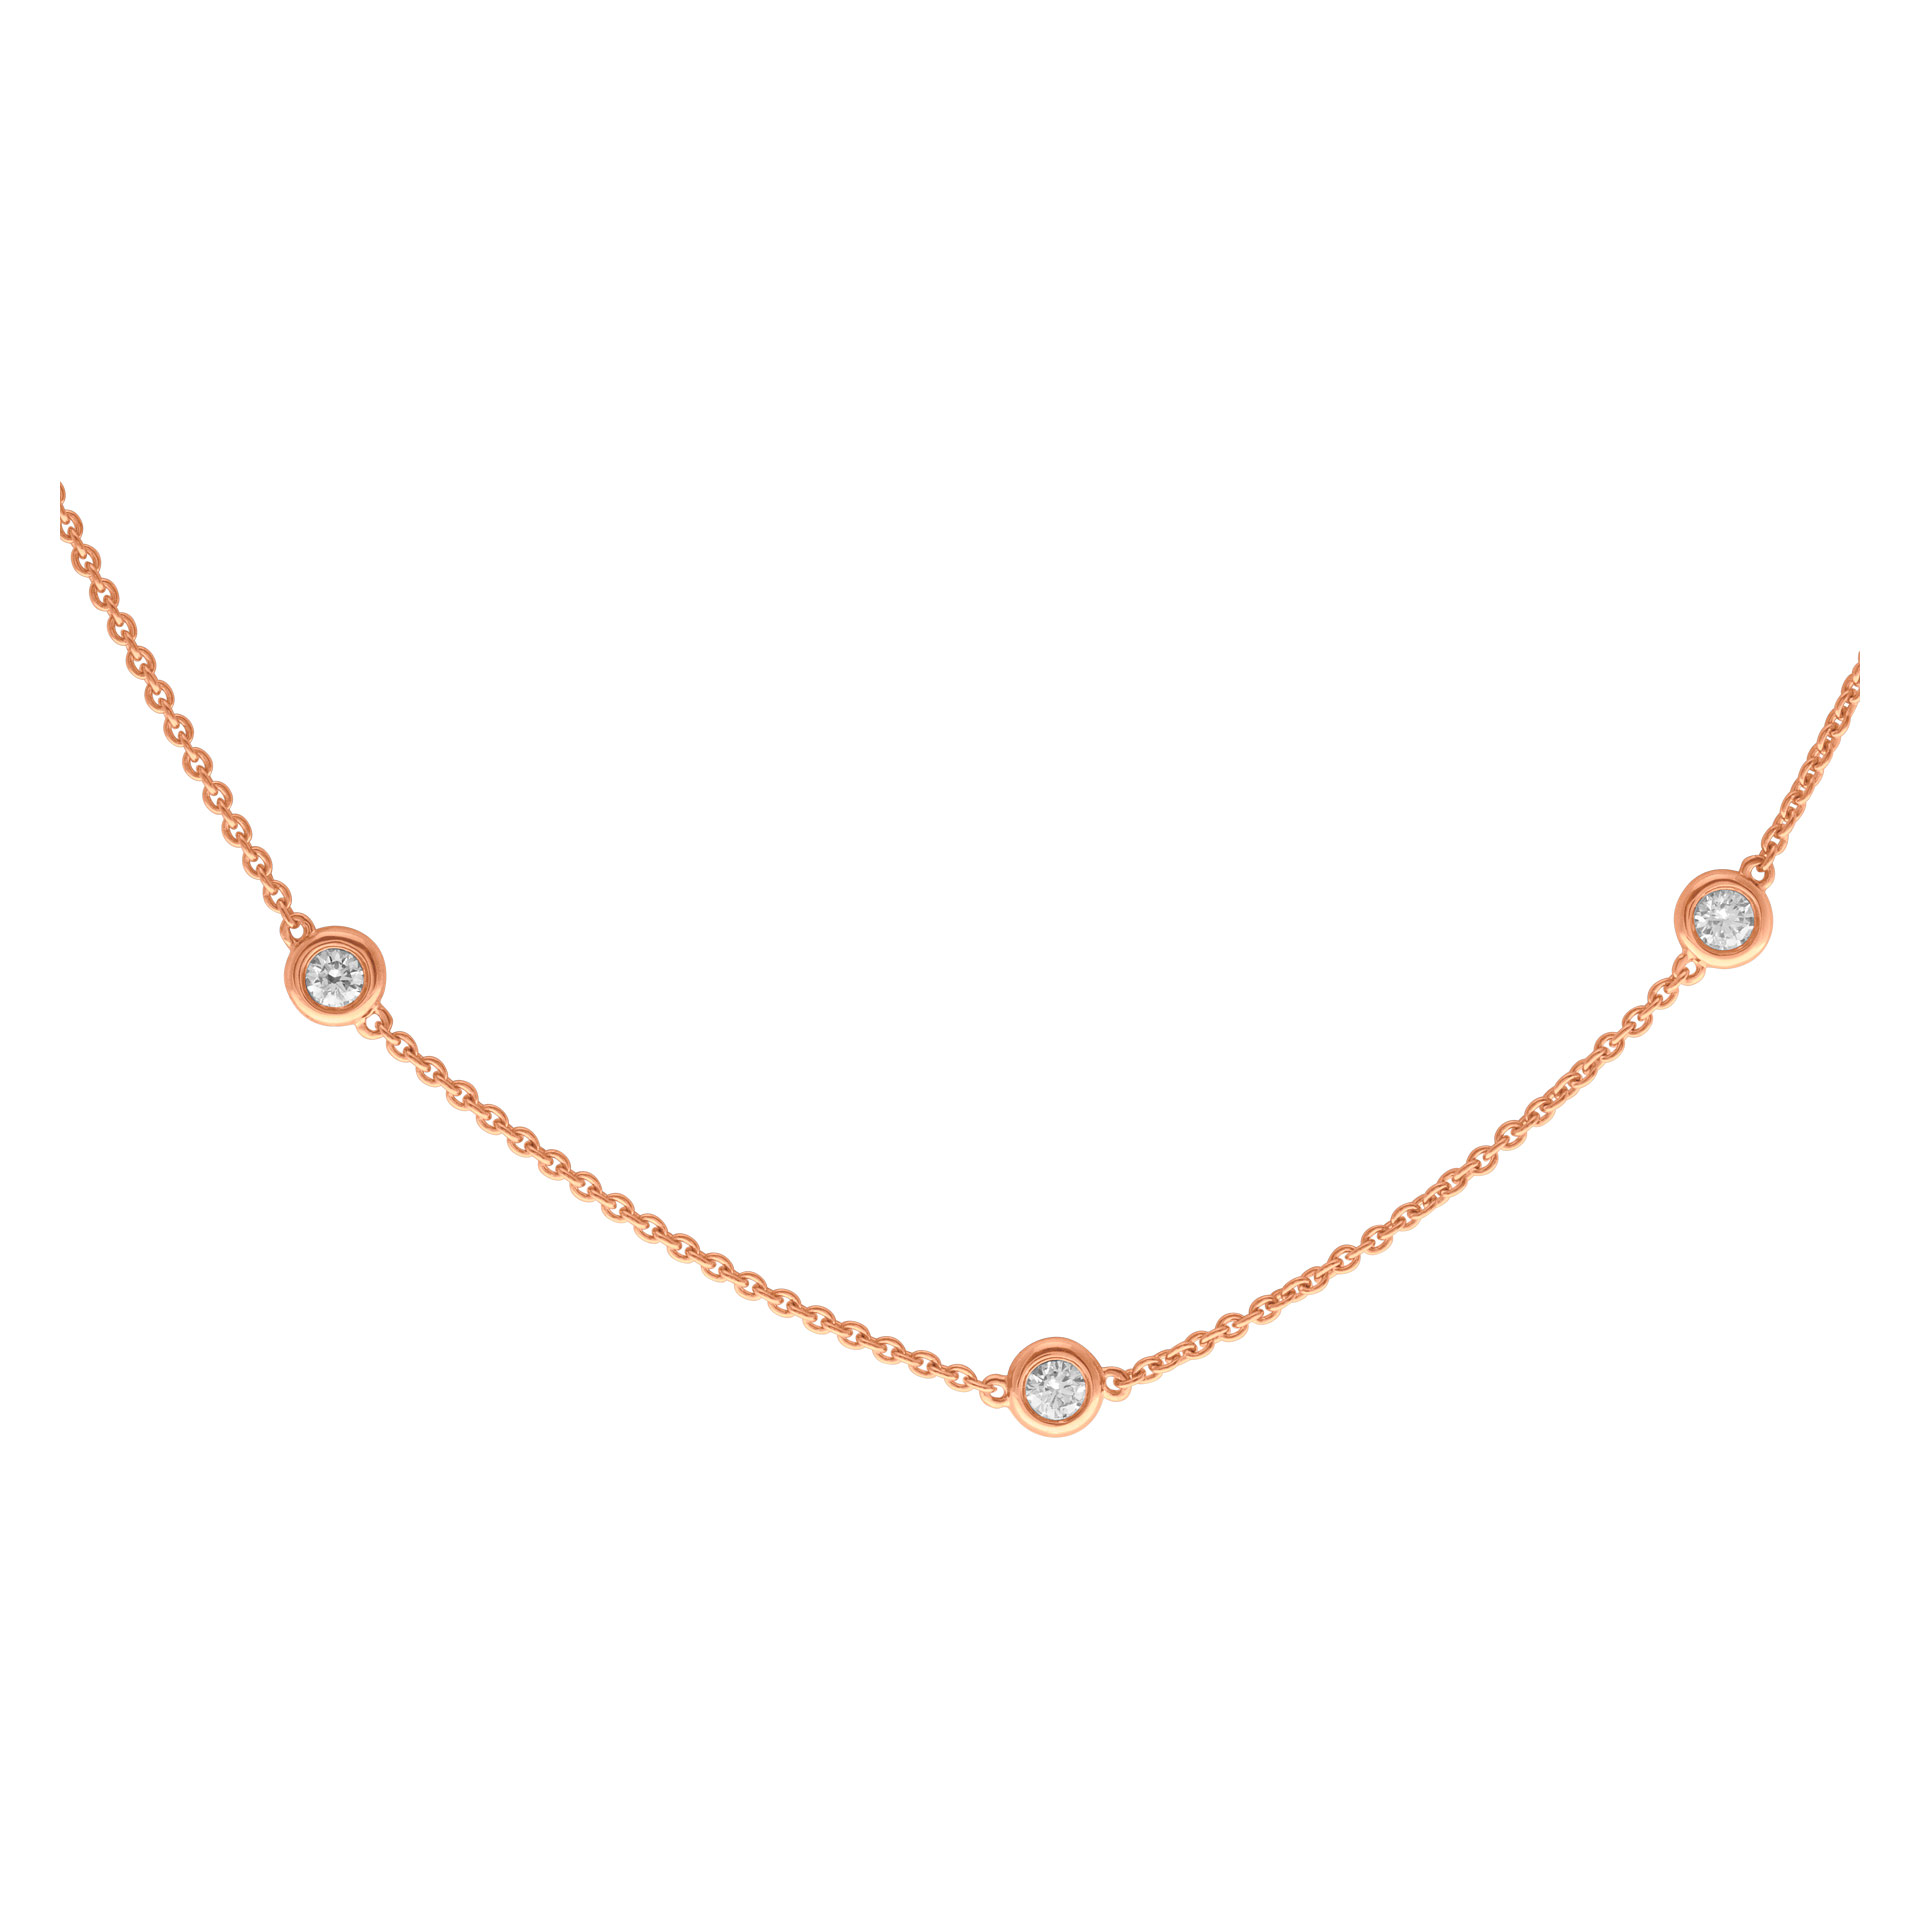 Diamonds by the yard 14k rose gold 2.25 carats in diamonds